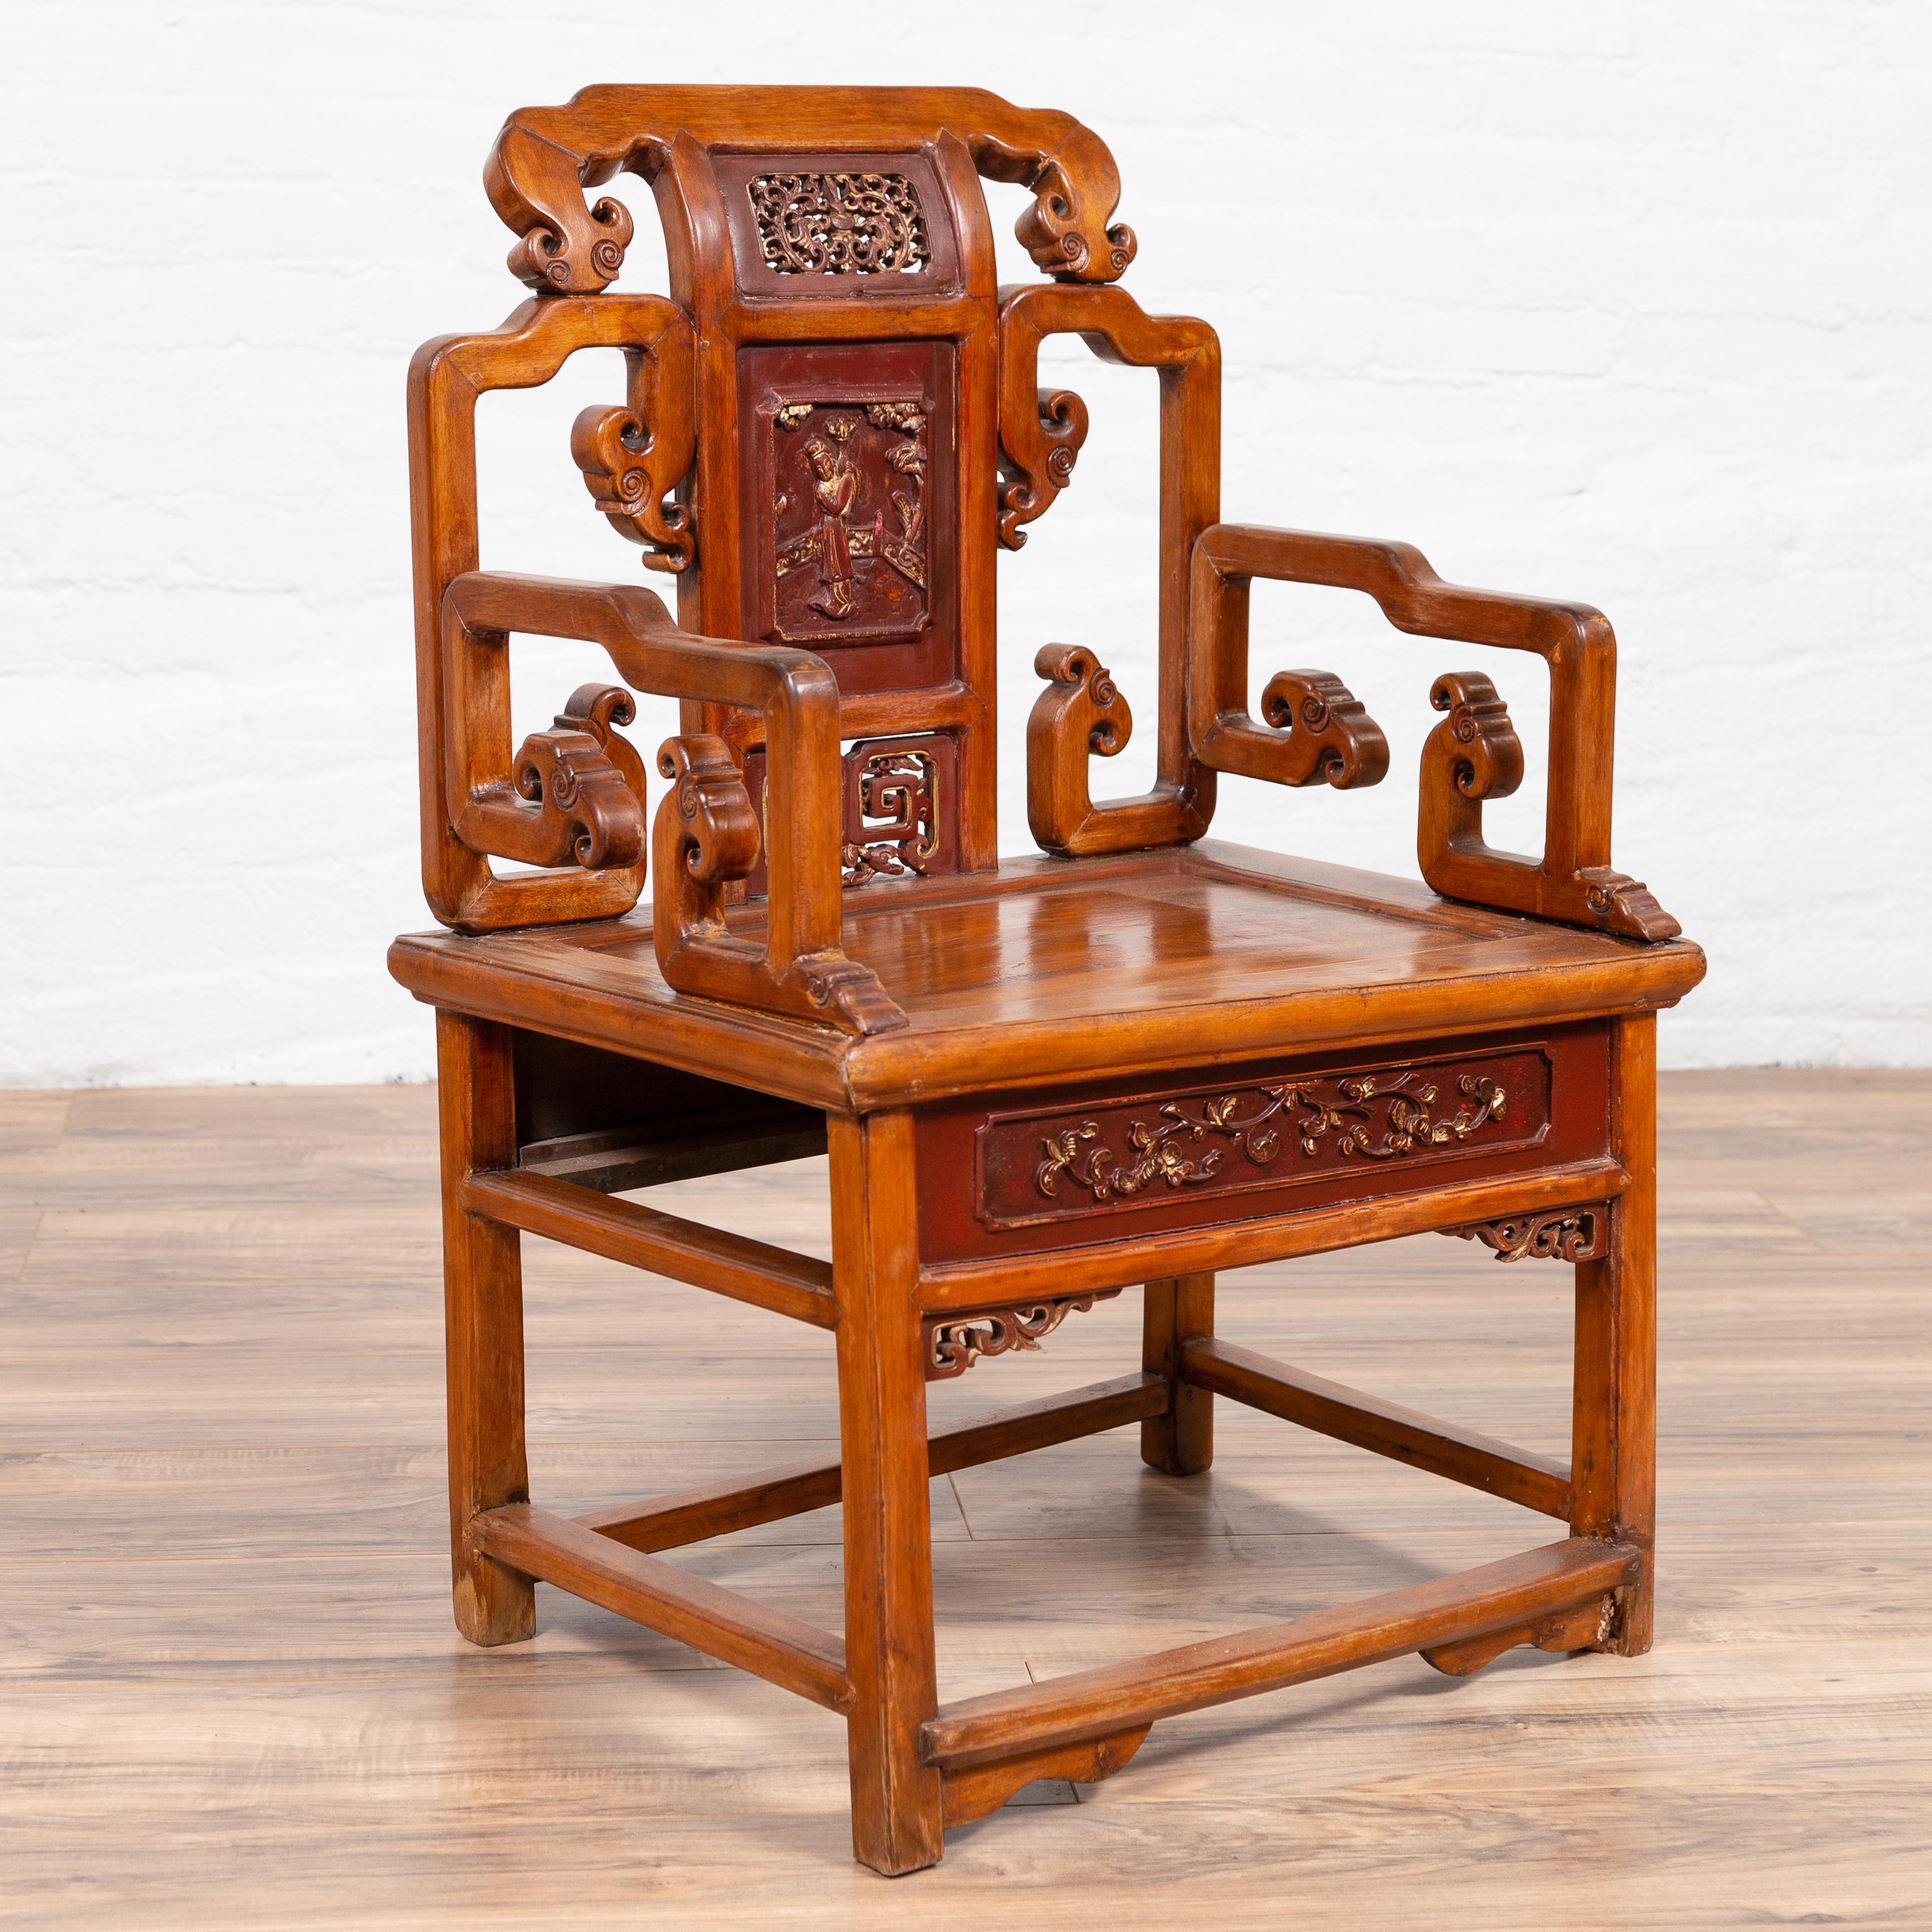 Hand Carved Antique Chinese Chair with Natural Wood Patina and Scroll Décor 2